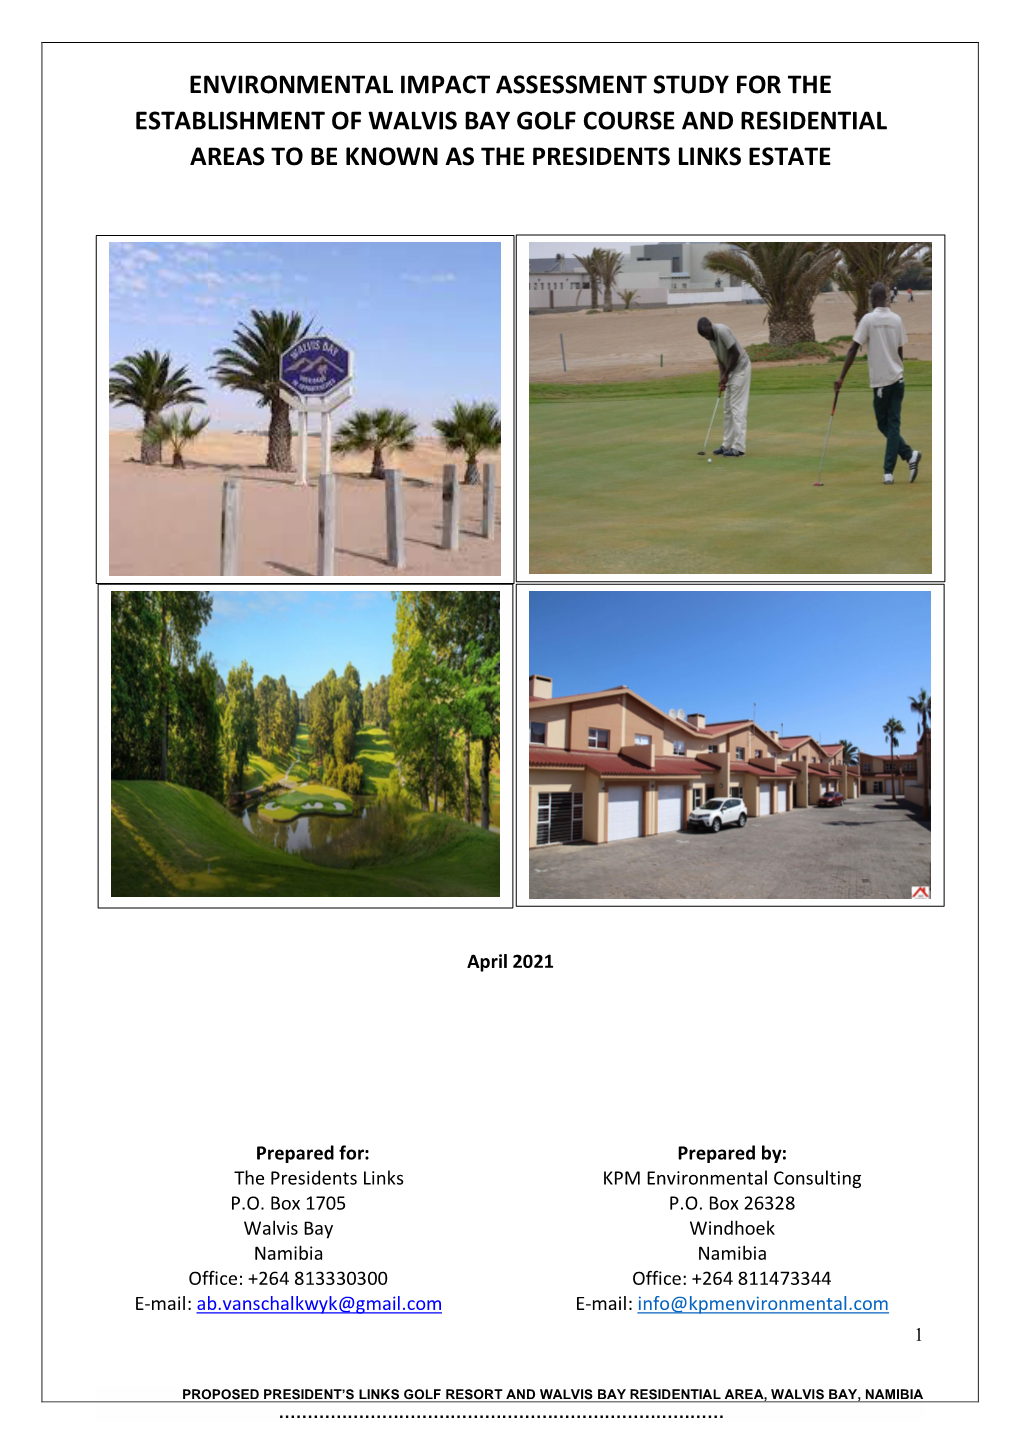 Environmental Impact Assessment Study for the Establishment of Walvis Bay Golf Course and Residential Areas to Be Known As the Presidents Links Estate